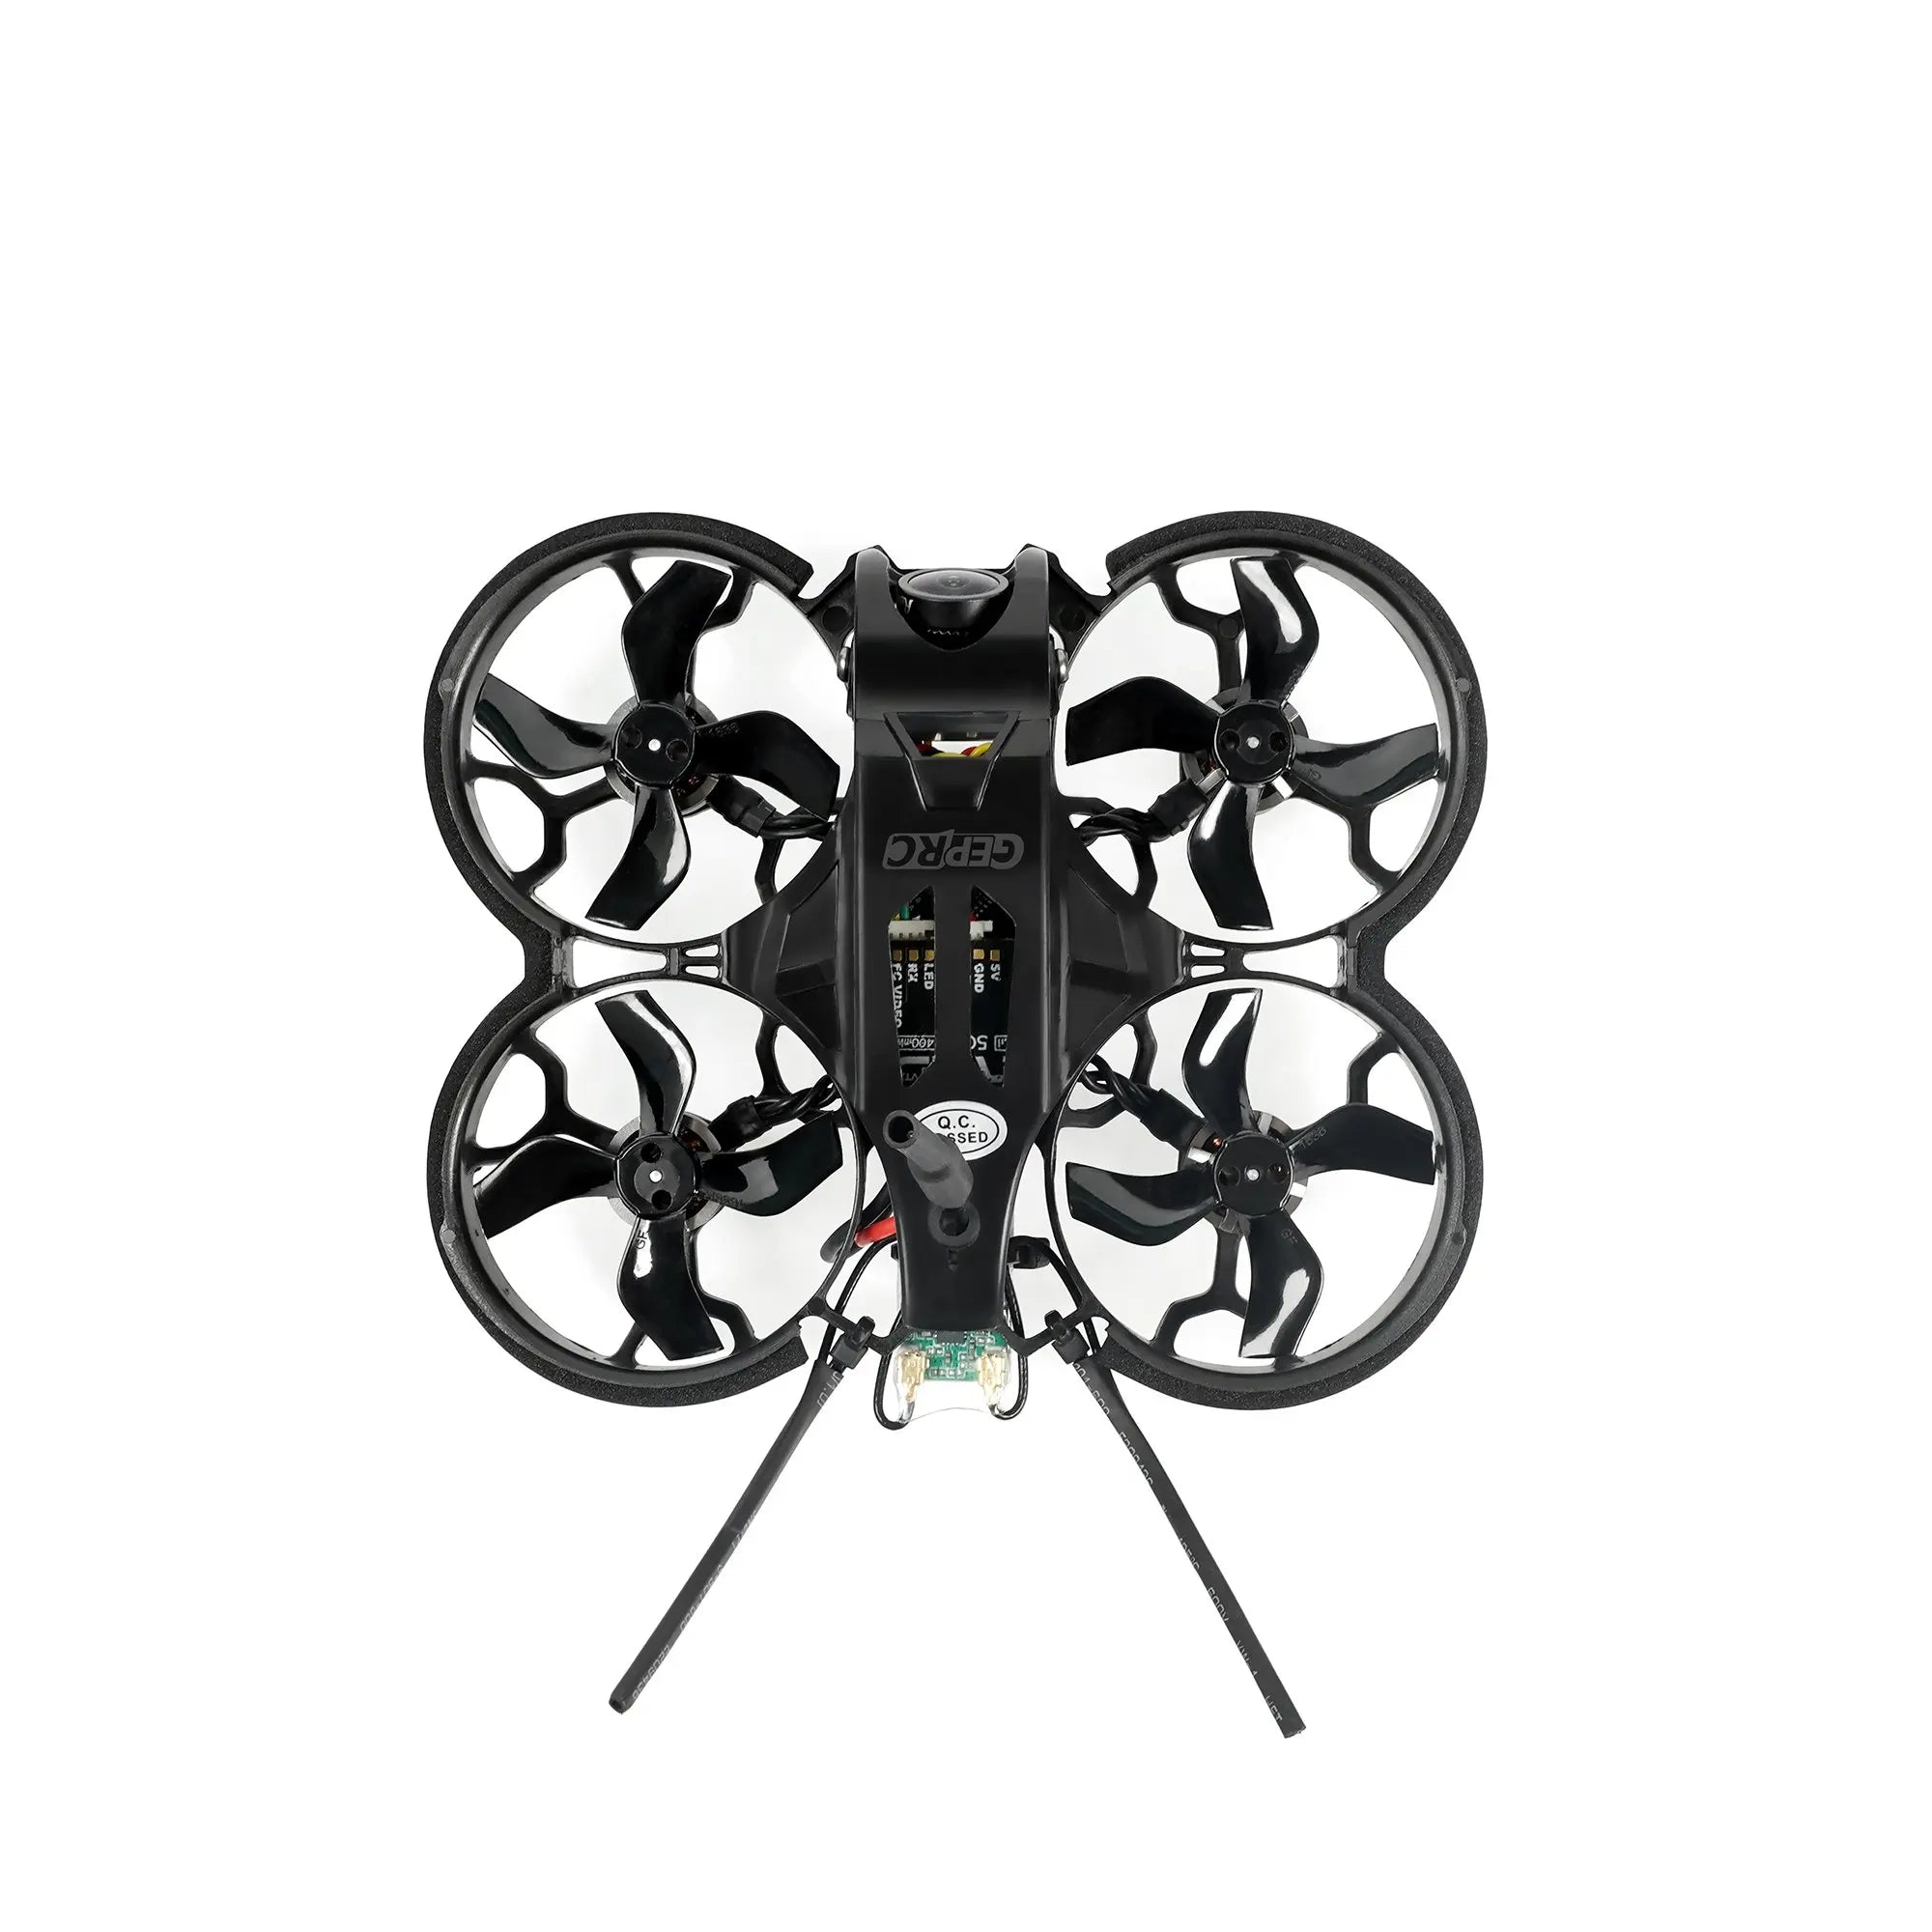 GEPRC TinyGO Racing FPV Whoop RTF Drone, TinyGO can use its own charger to charge